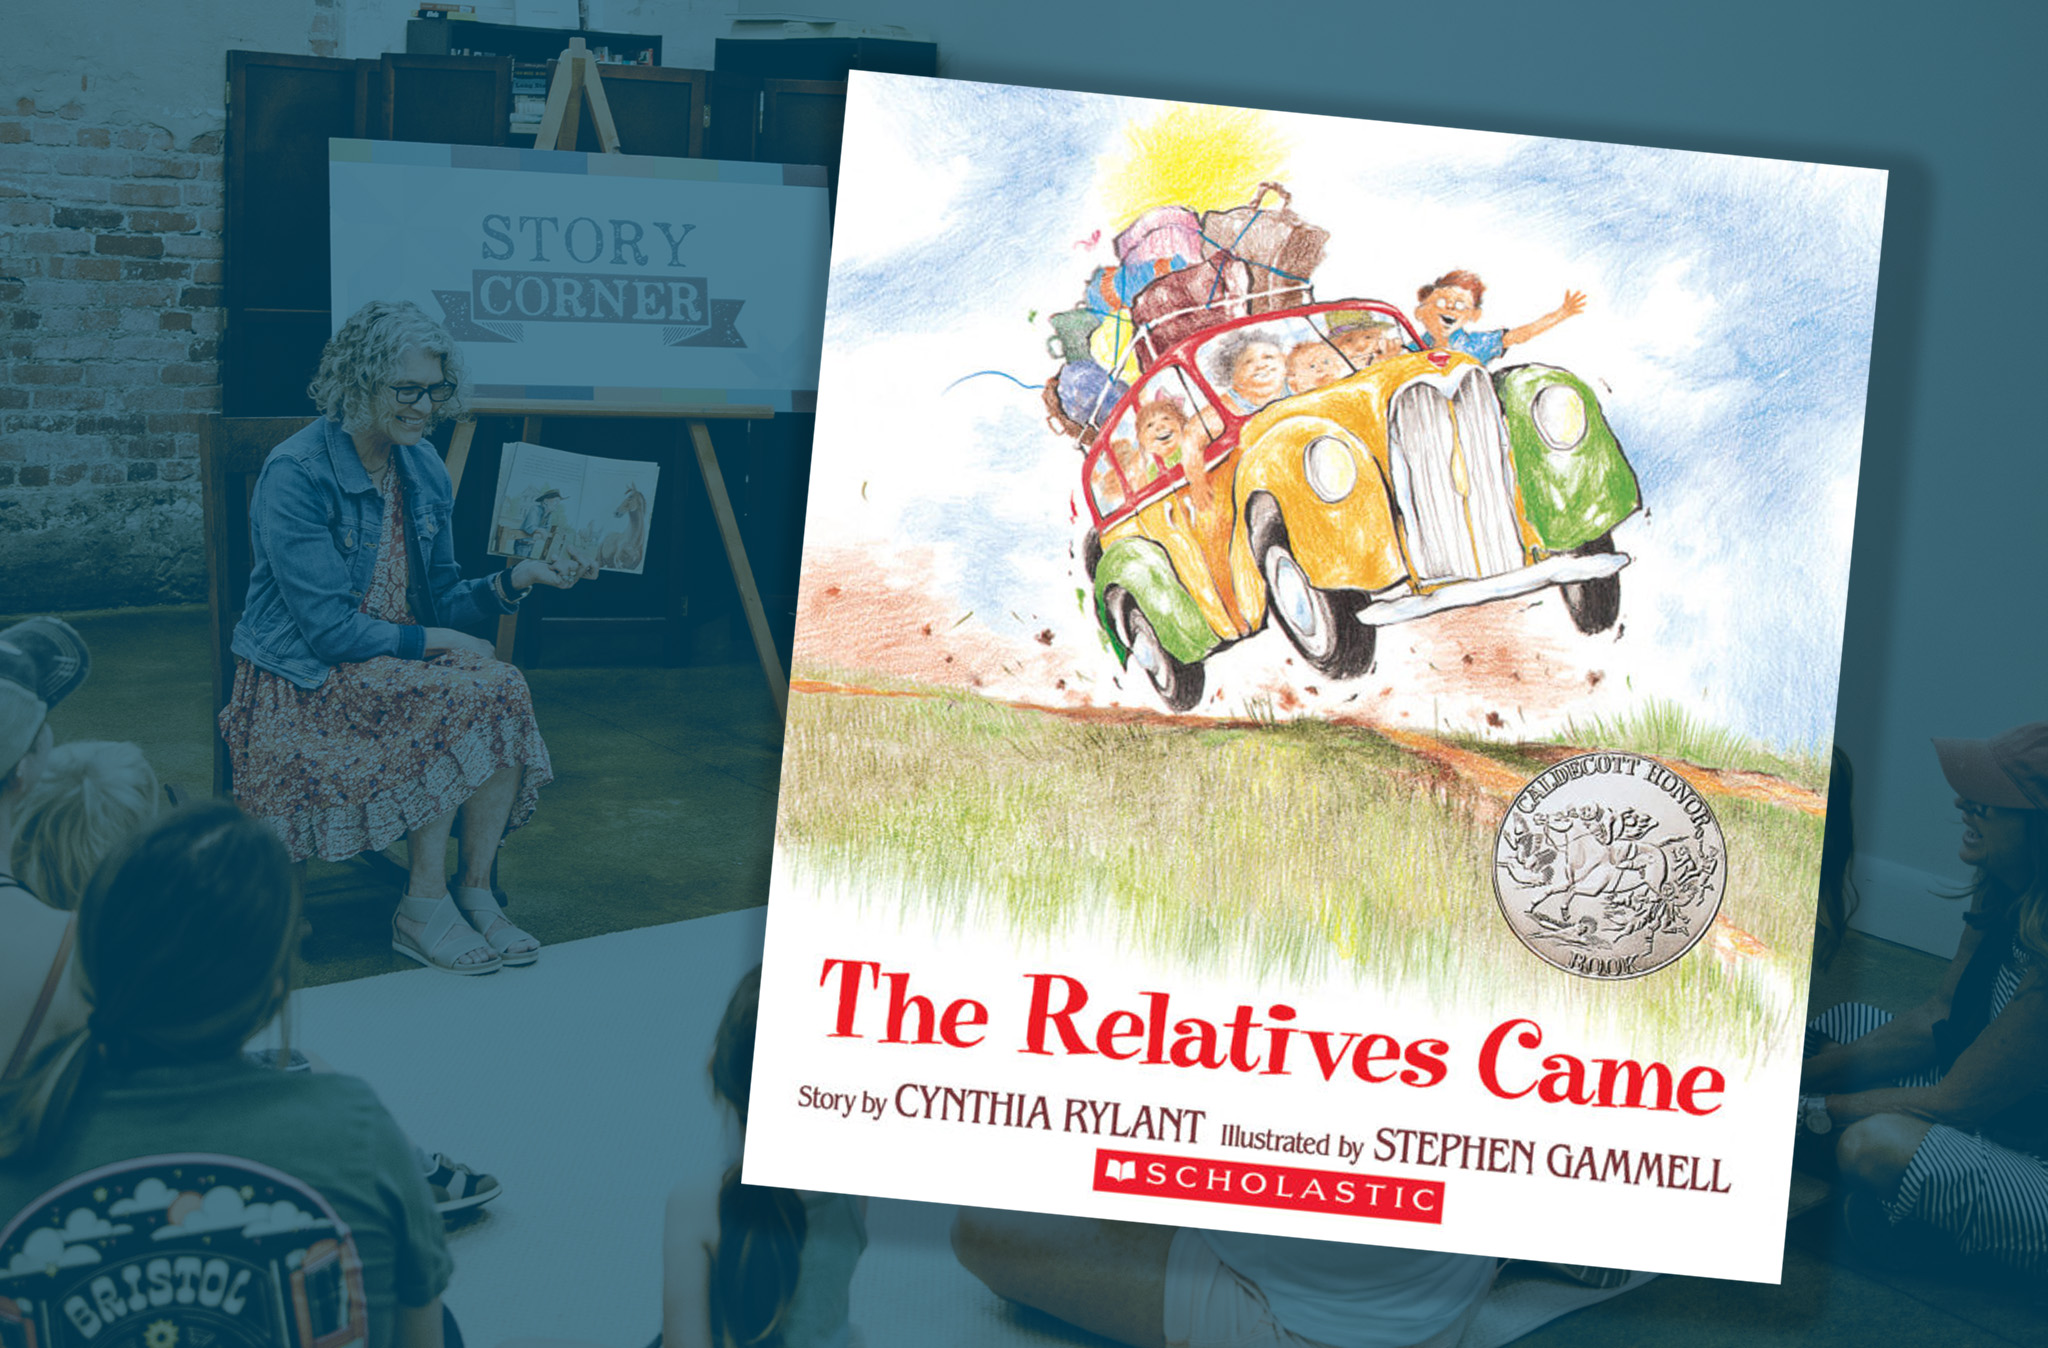 Graphic featuring the cover of the book "The Relatives Came."